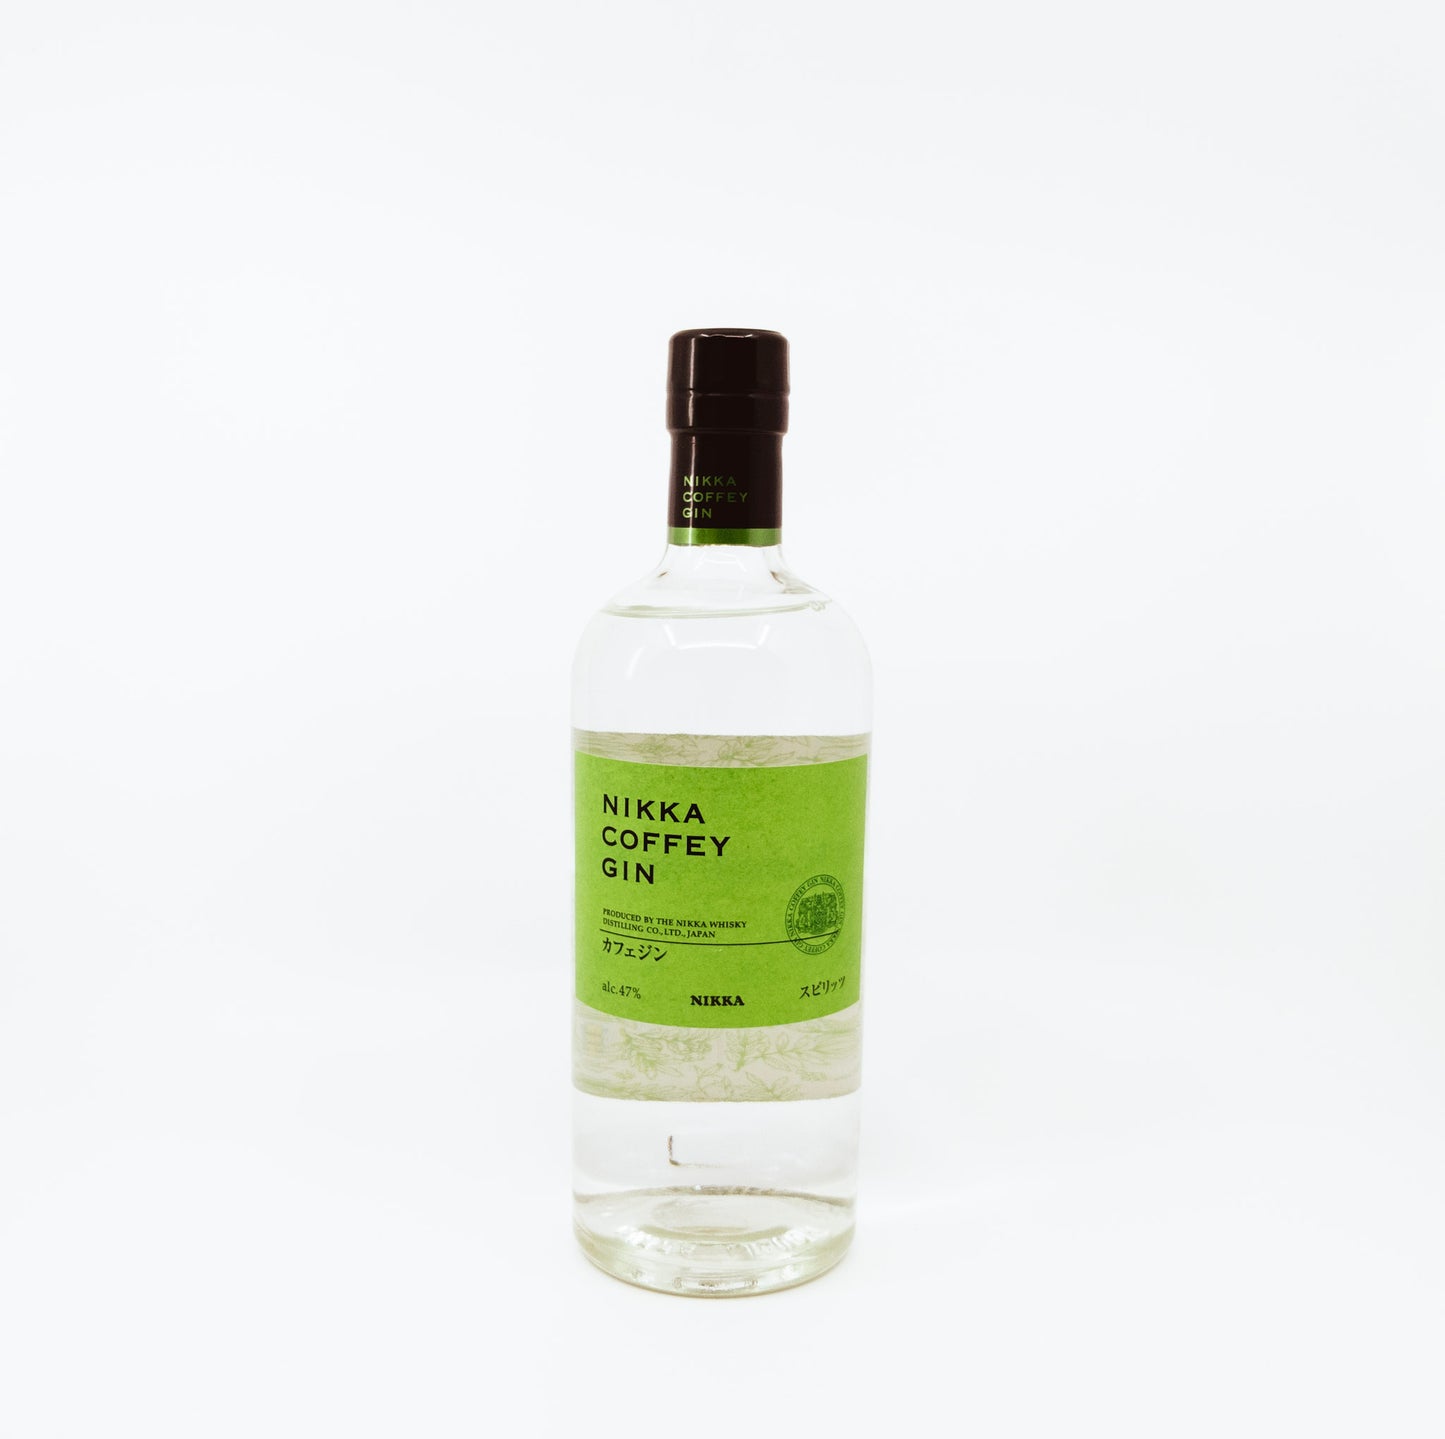 bottle of nikka coffey gin with green label